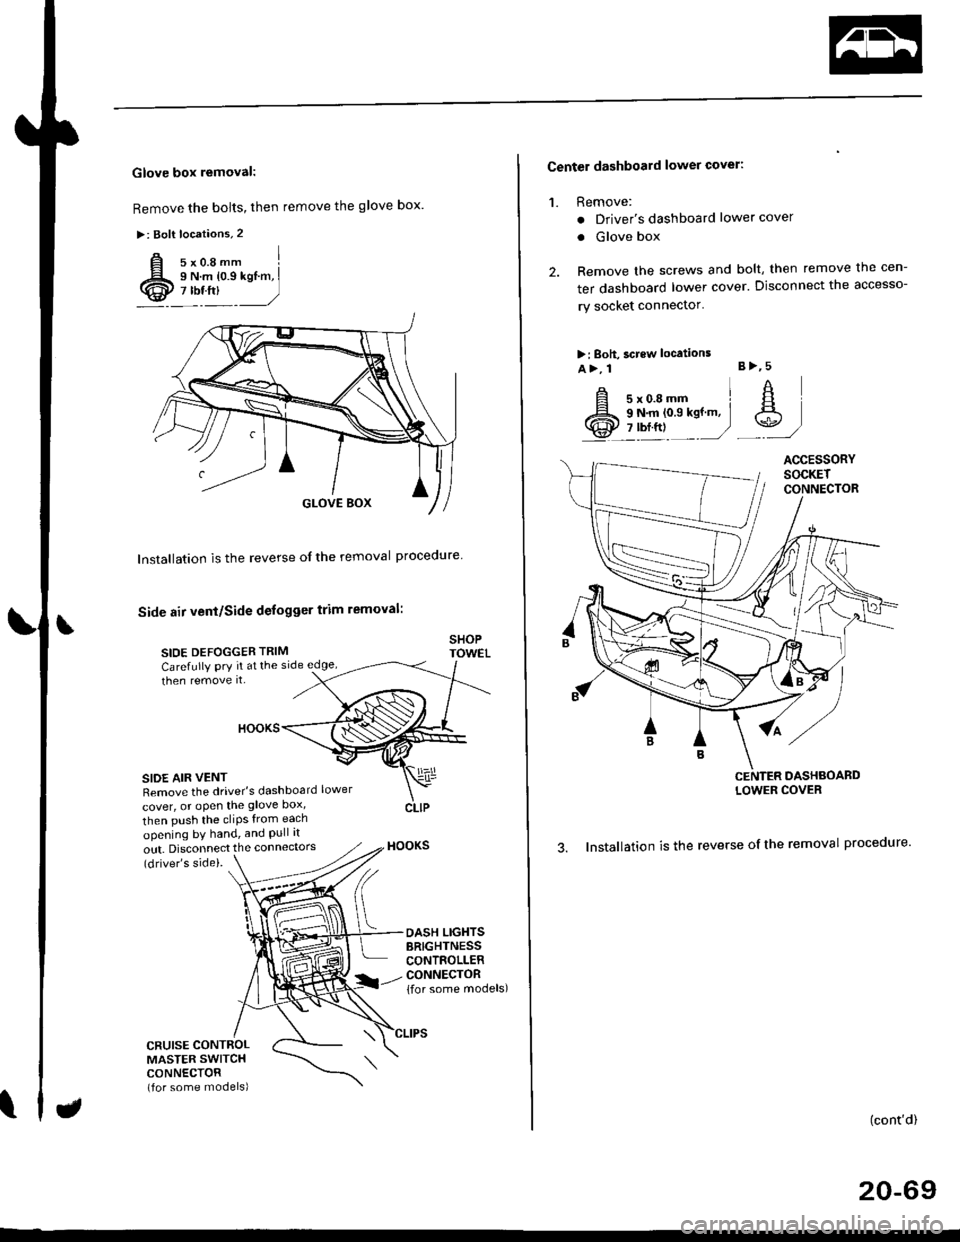 HONDA CIVIC 1997 6.G Workshop Manual Glove box removal:
Remove the bolts, then remove the glove box.
>: Bolt locations,2
Installation is the reverse of the removal proceoure
Side air vent/Side defogger trim removal:
SIOE DEFOGGER TRIMSHO